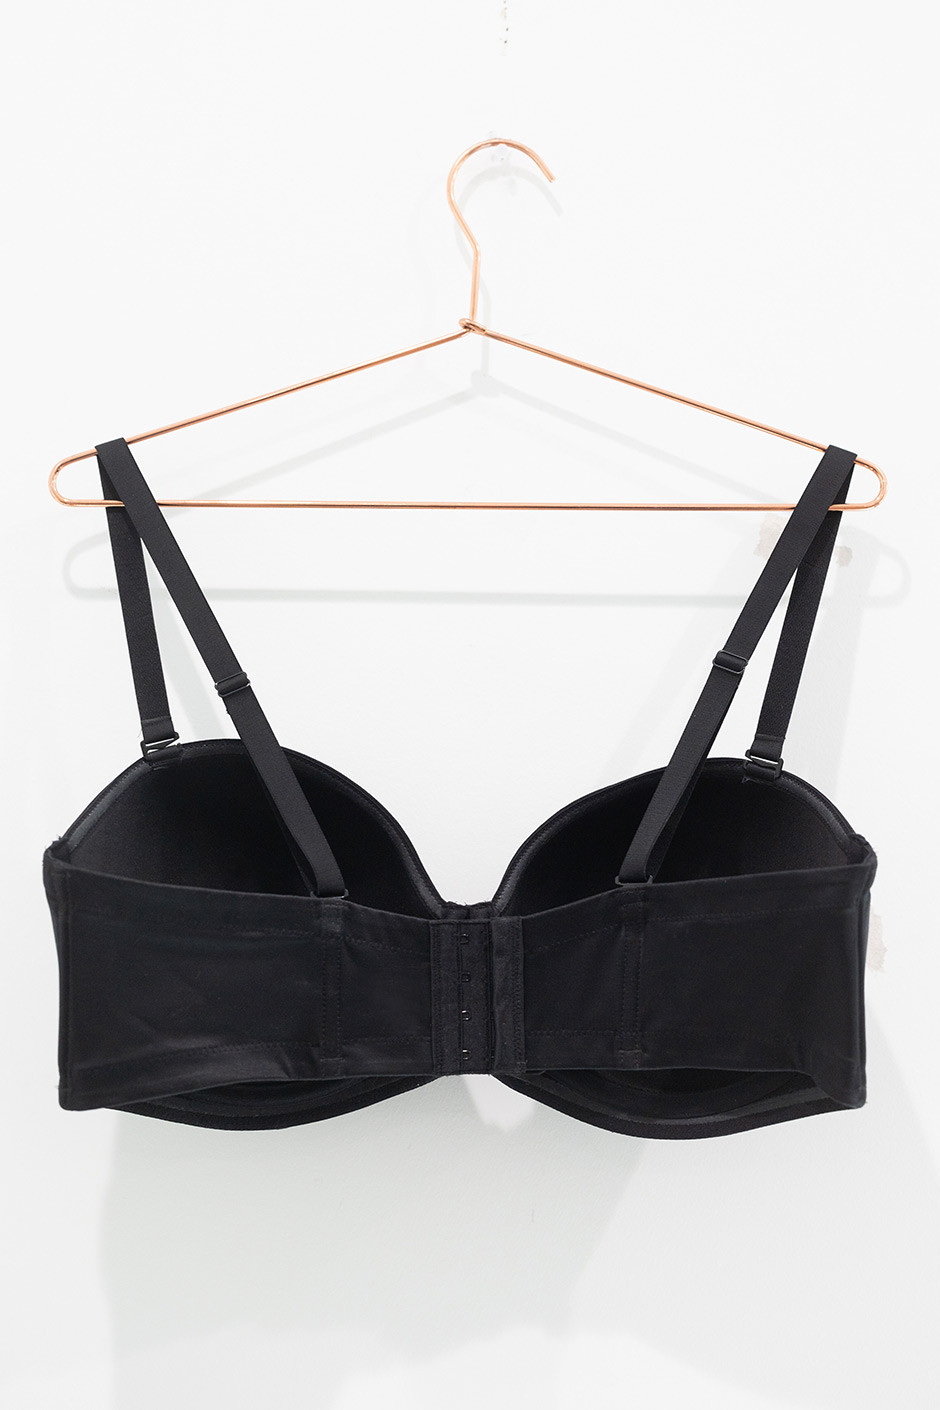 Red Carpet Strapless Underwire Bra curated on LTK